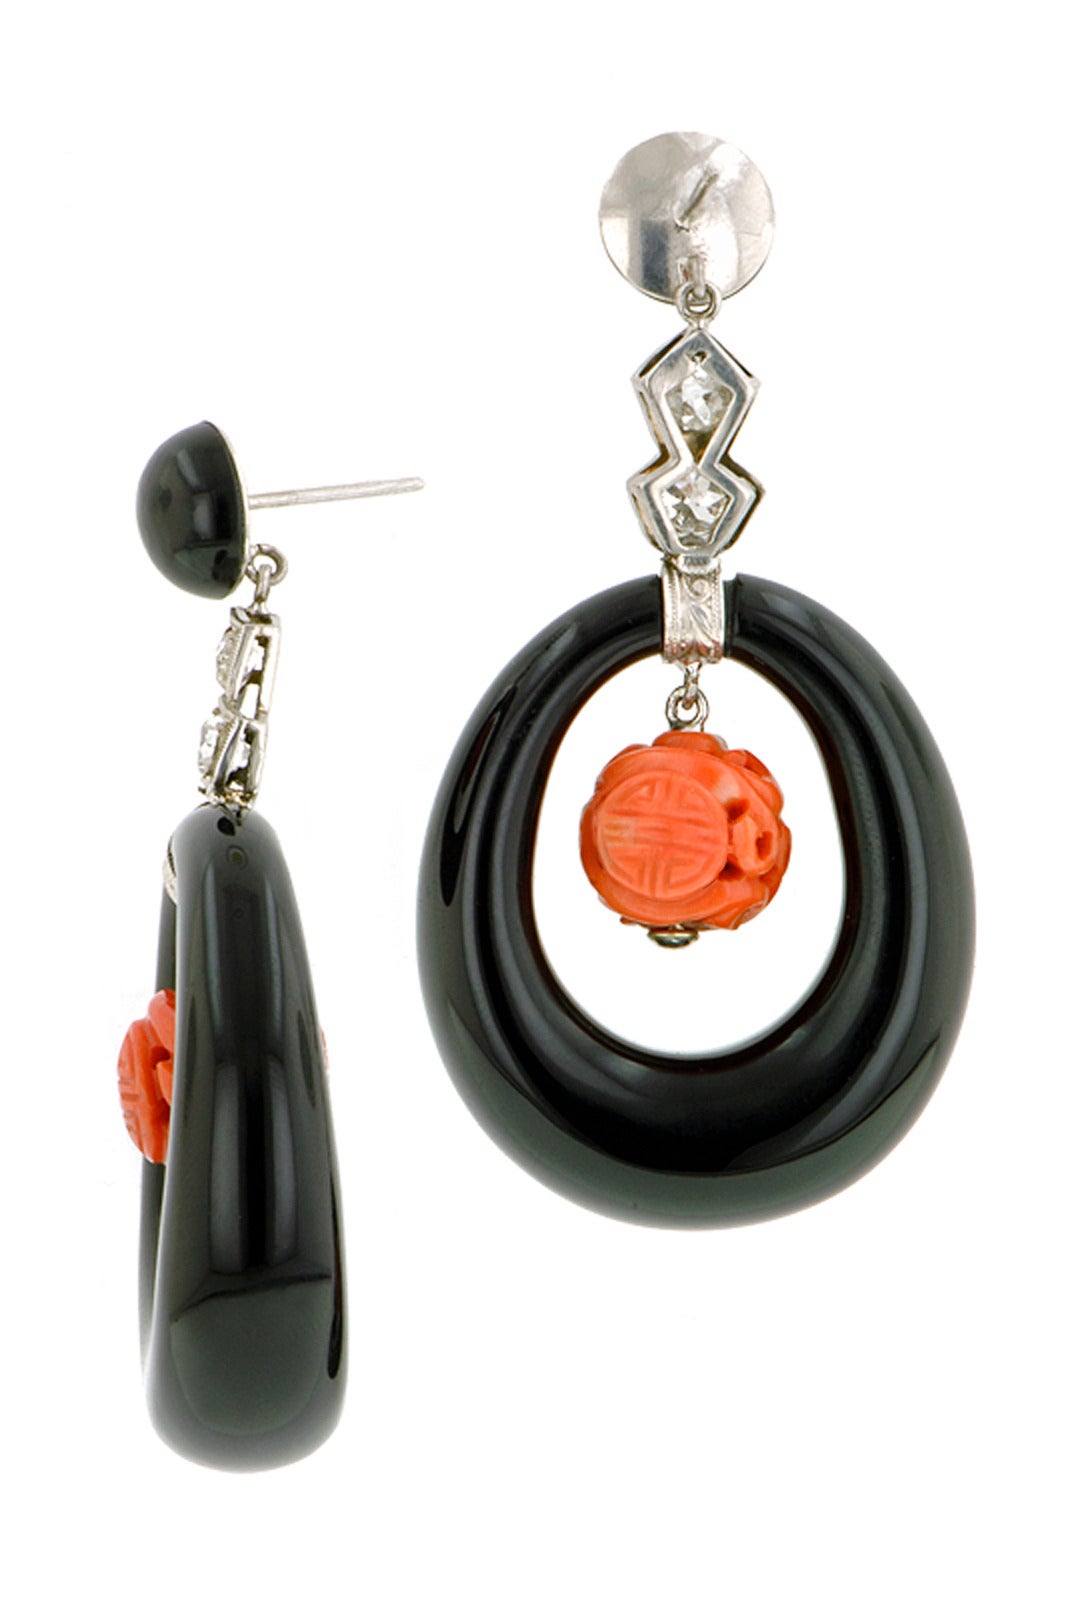 Vintage onyx diamond & coral earrings with onyx tops suspending Old Mine cut diamonds weighing app. .64ctw. and carved coral drops measuring app. 10mm,within onyx hoops measuring app. 32mm x 28mm, fashioned in platinum with 14kw gold backs.